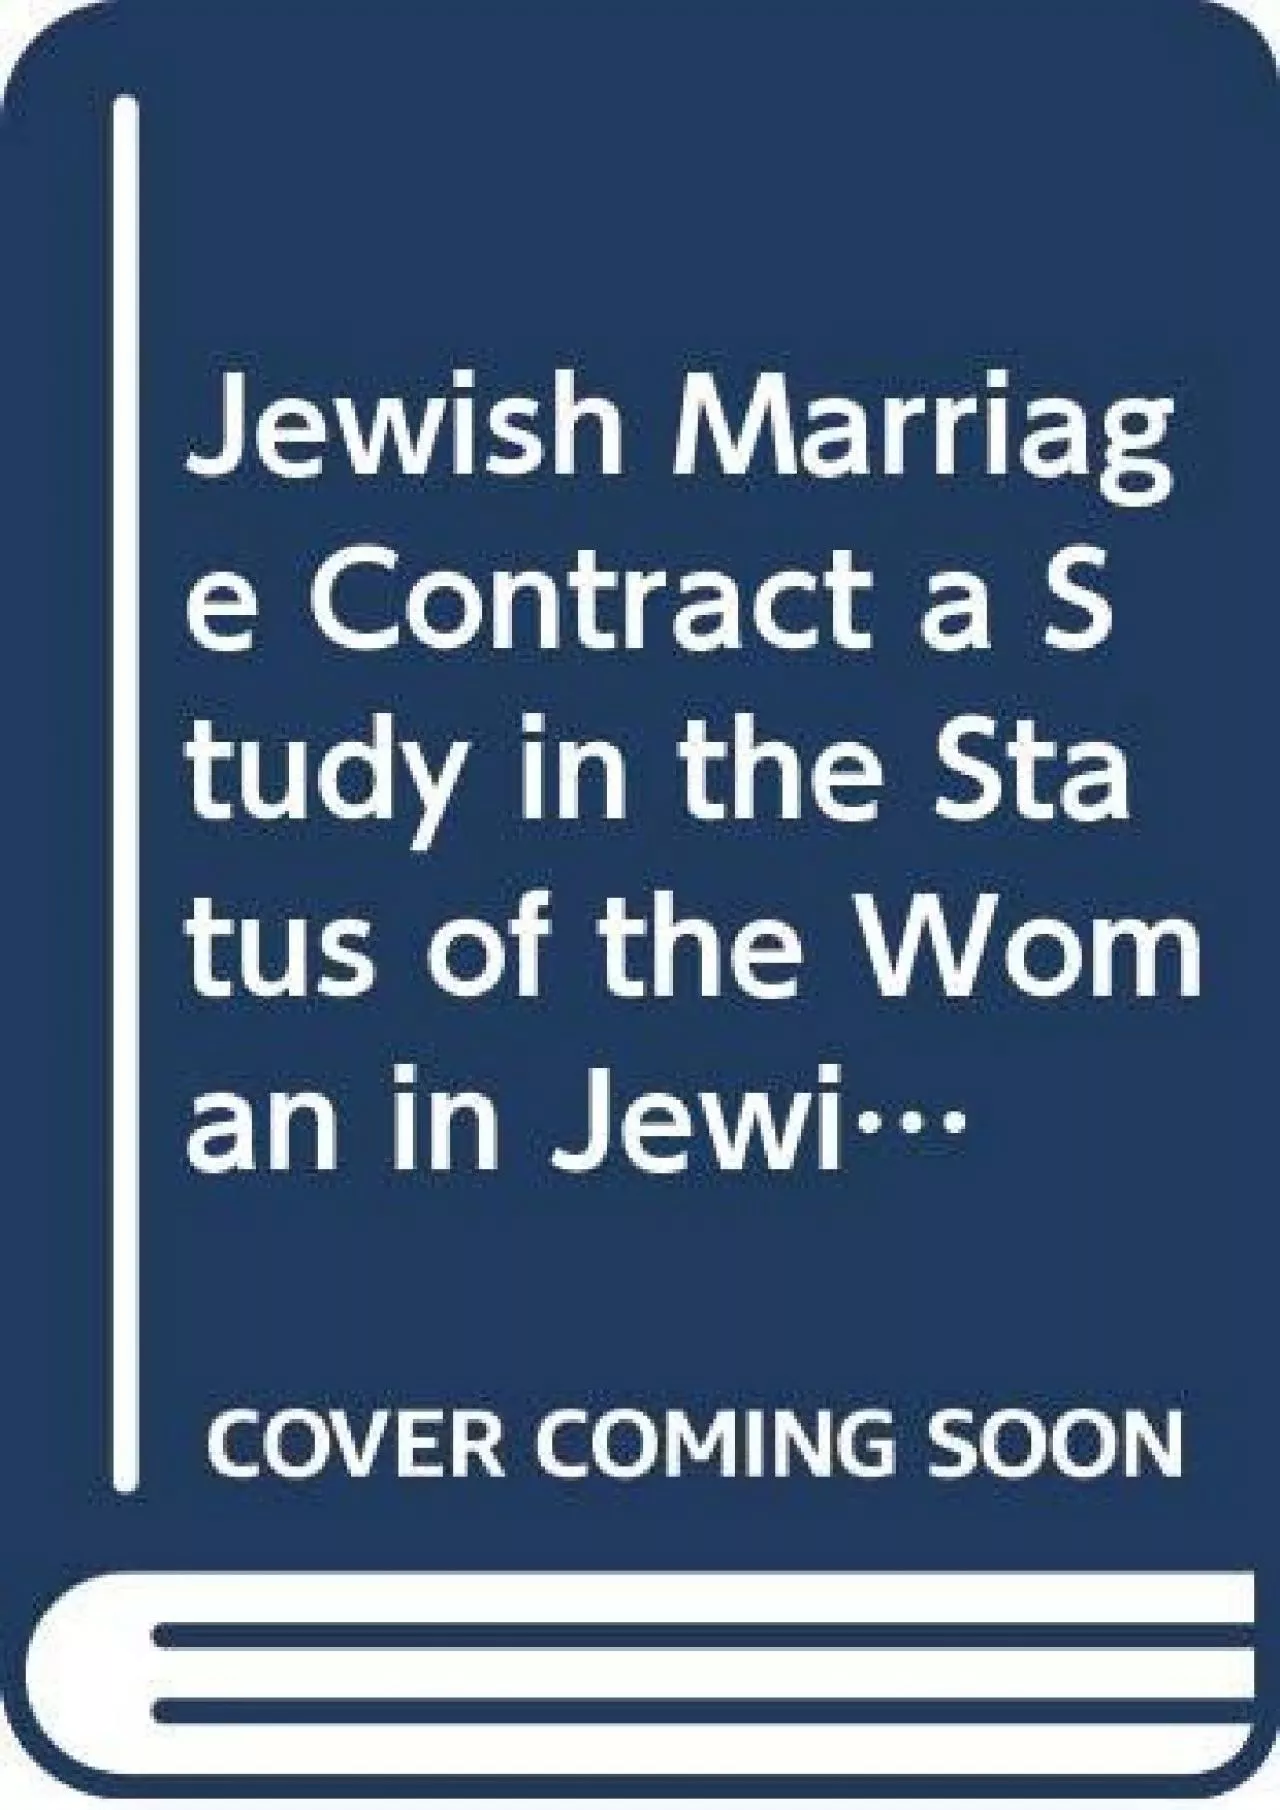 Read ebook [PDF] Jewish Marriage Contract a Study in the Status of the Woman in Jewish